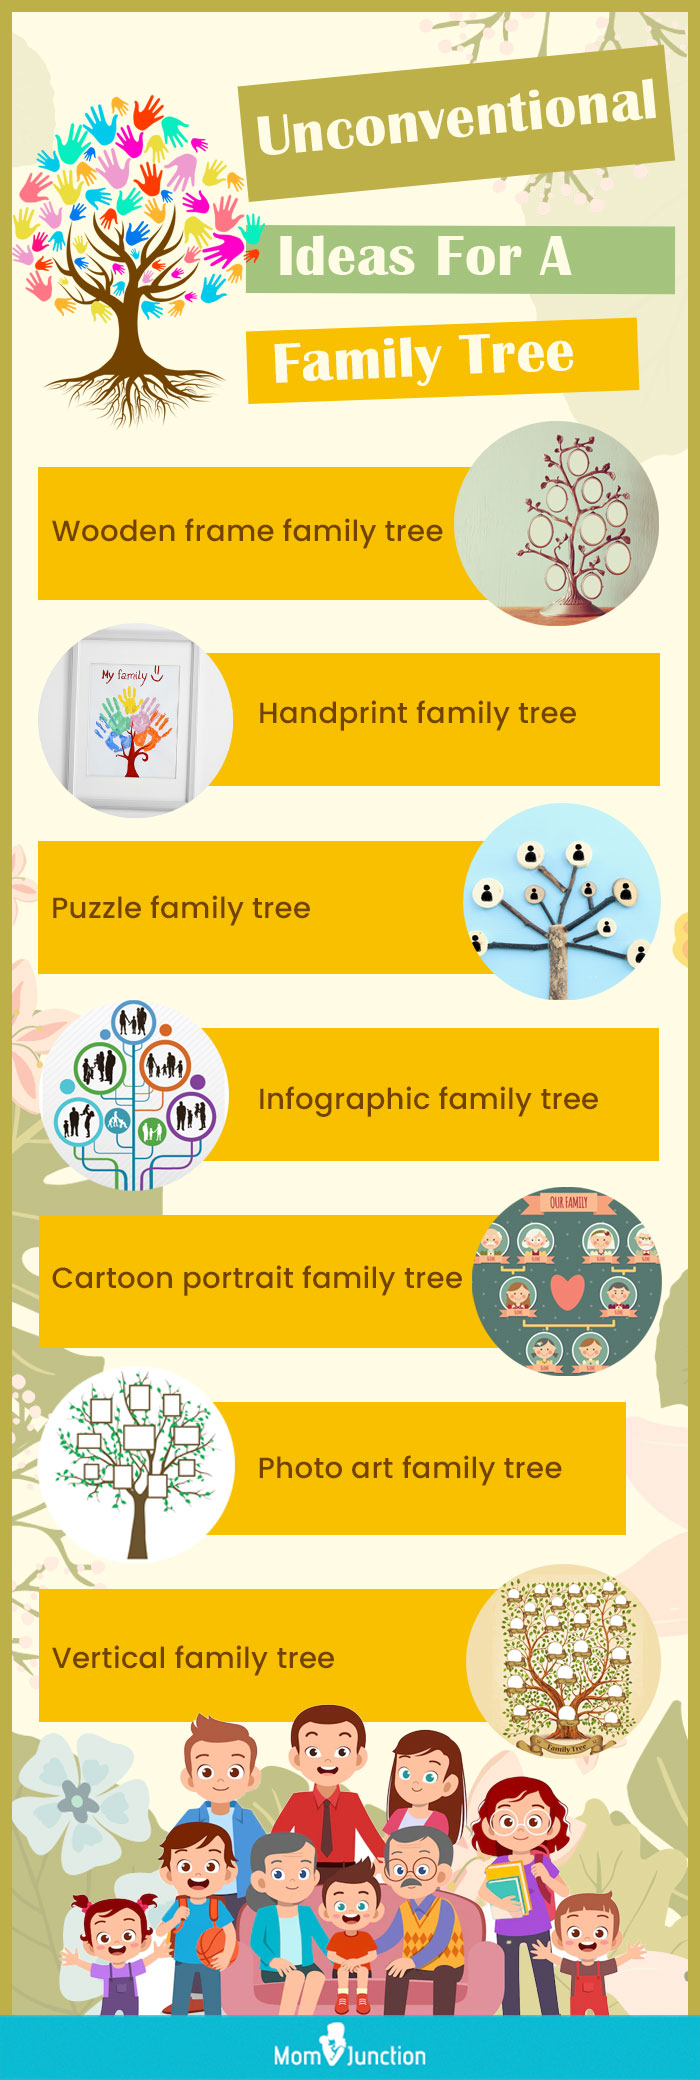 unconventional ideas for a family tree [infographic]